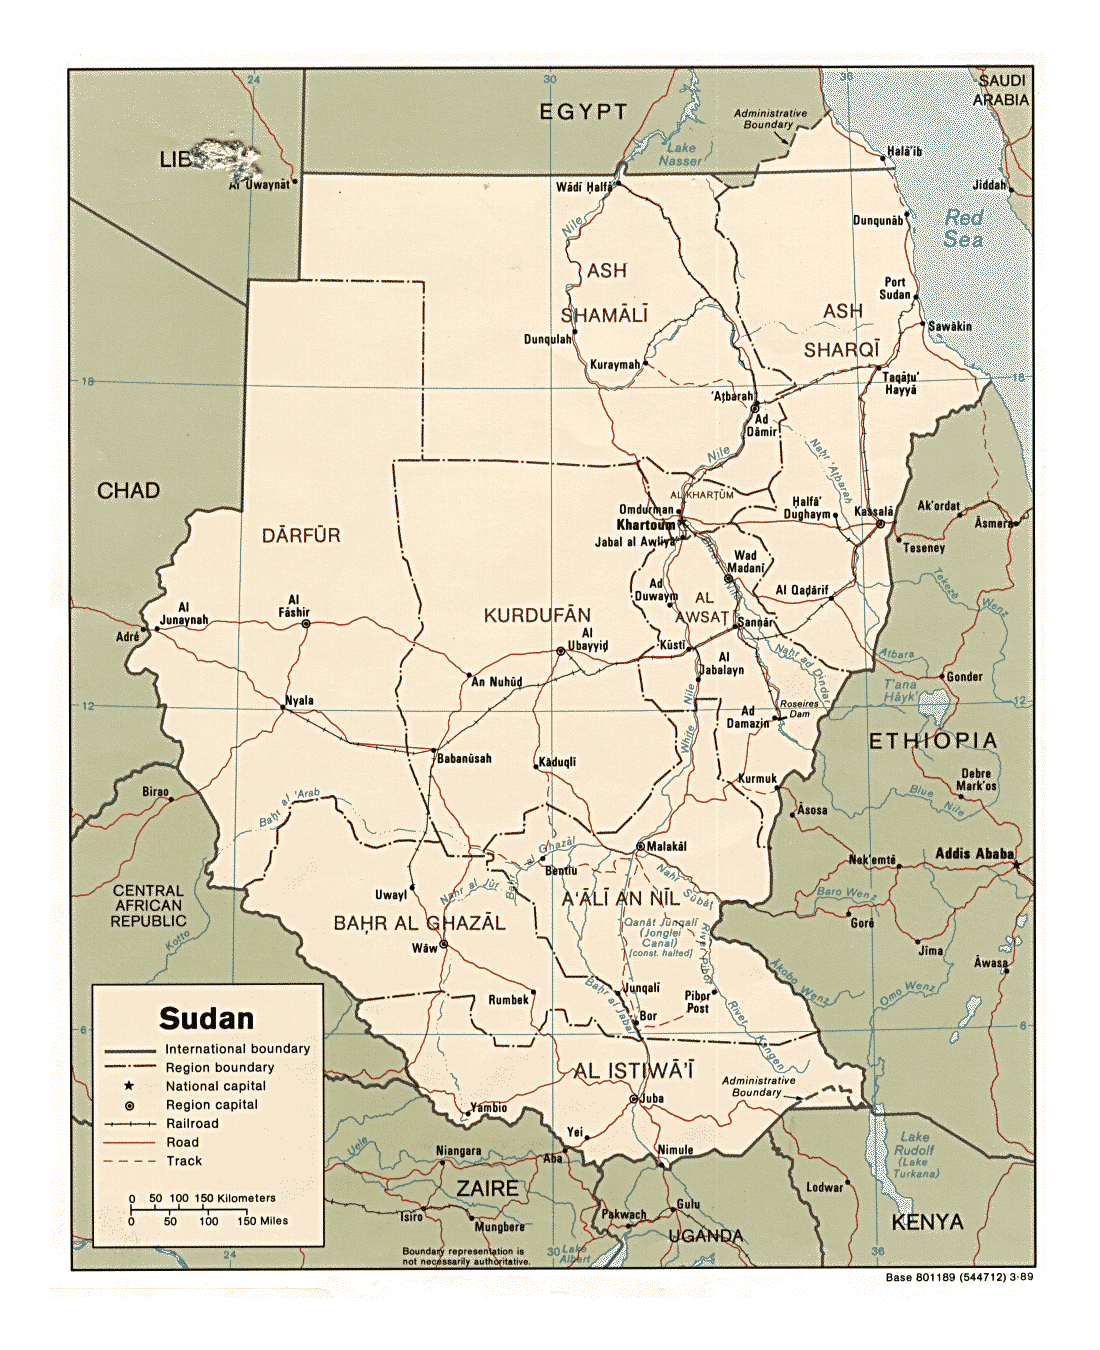 Detailed Political And Administrative Map Of Sudan With Roads Railroads And Major Cities